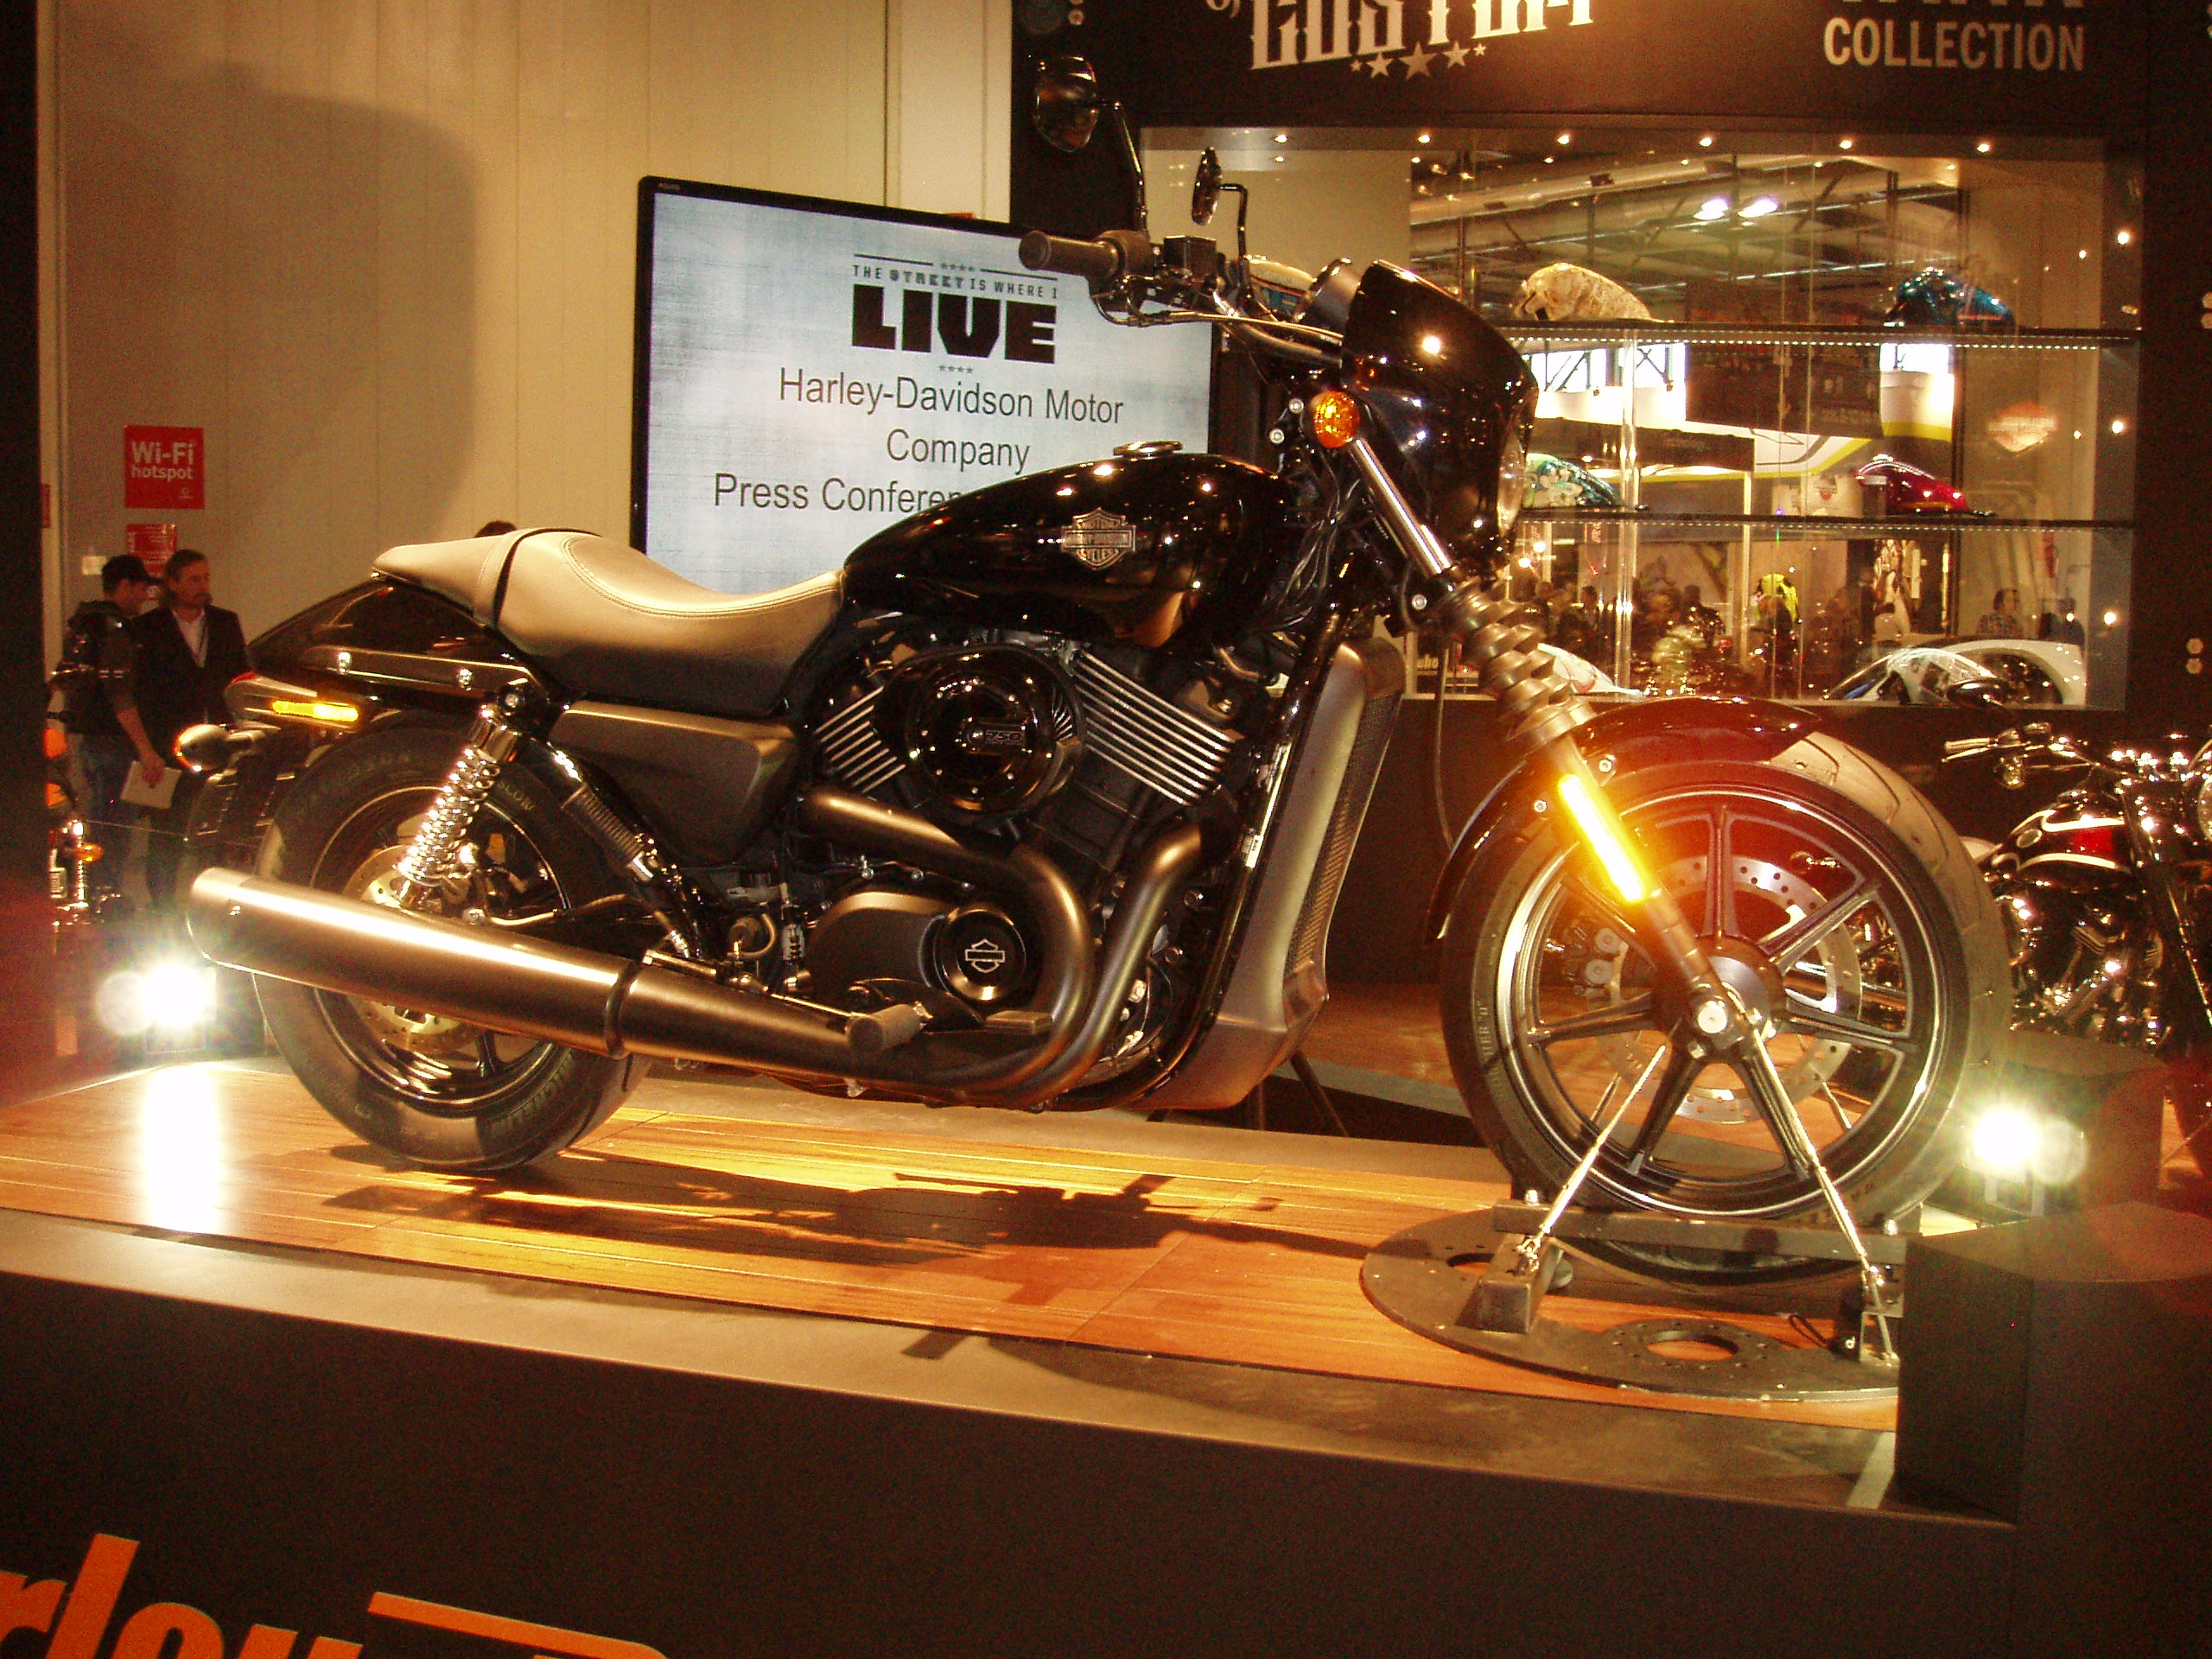 Harley 500: More pictures